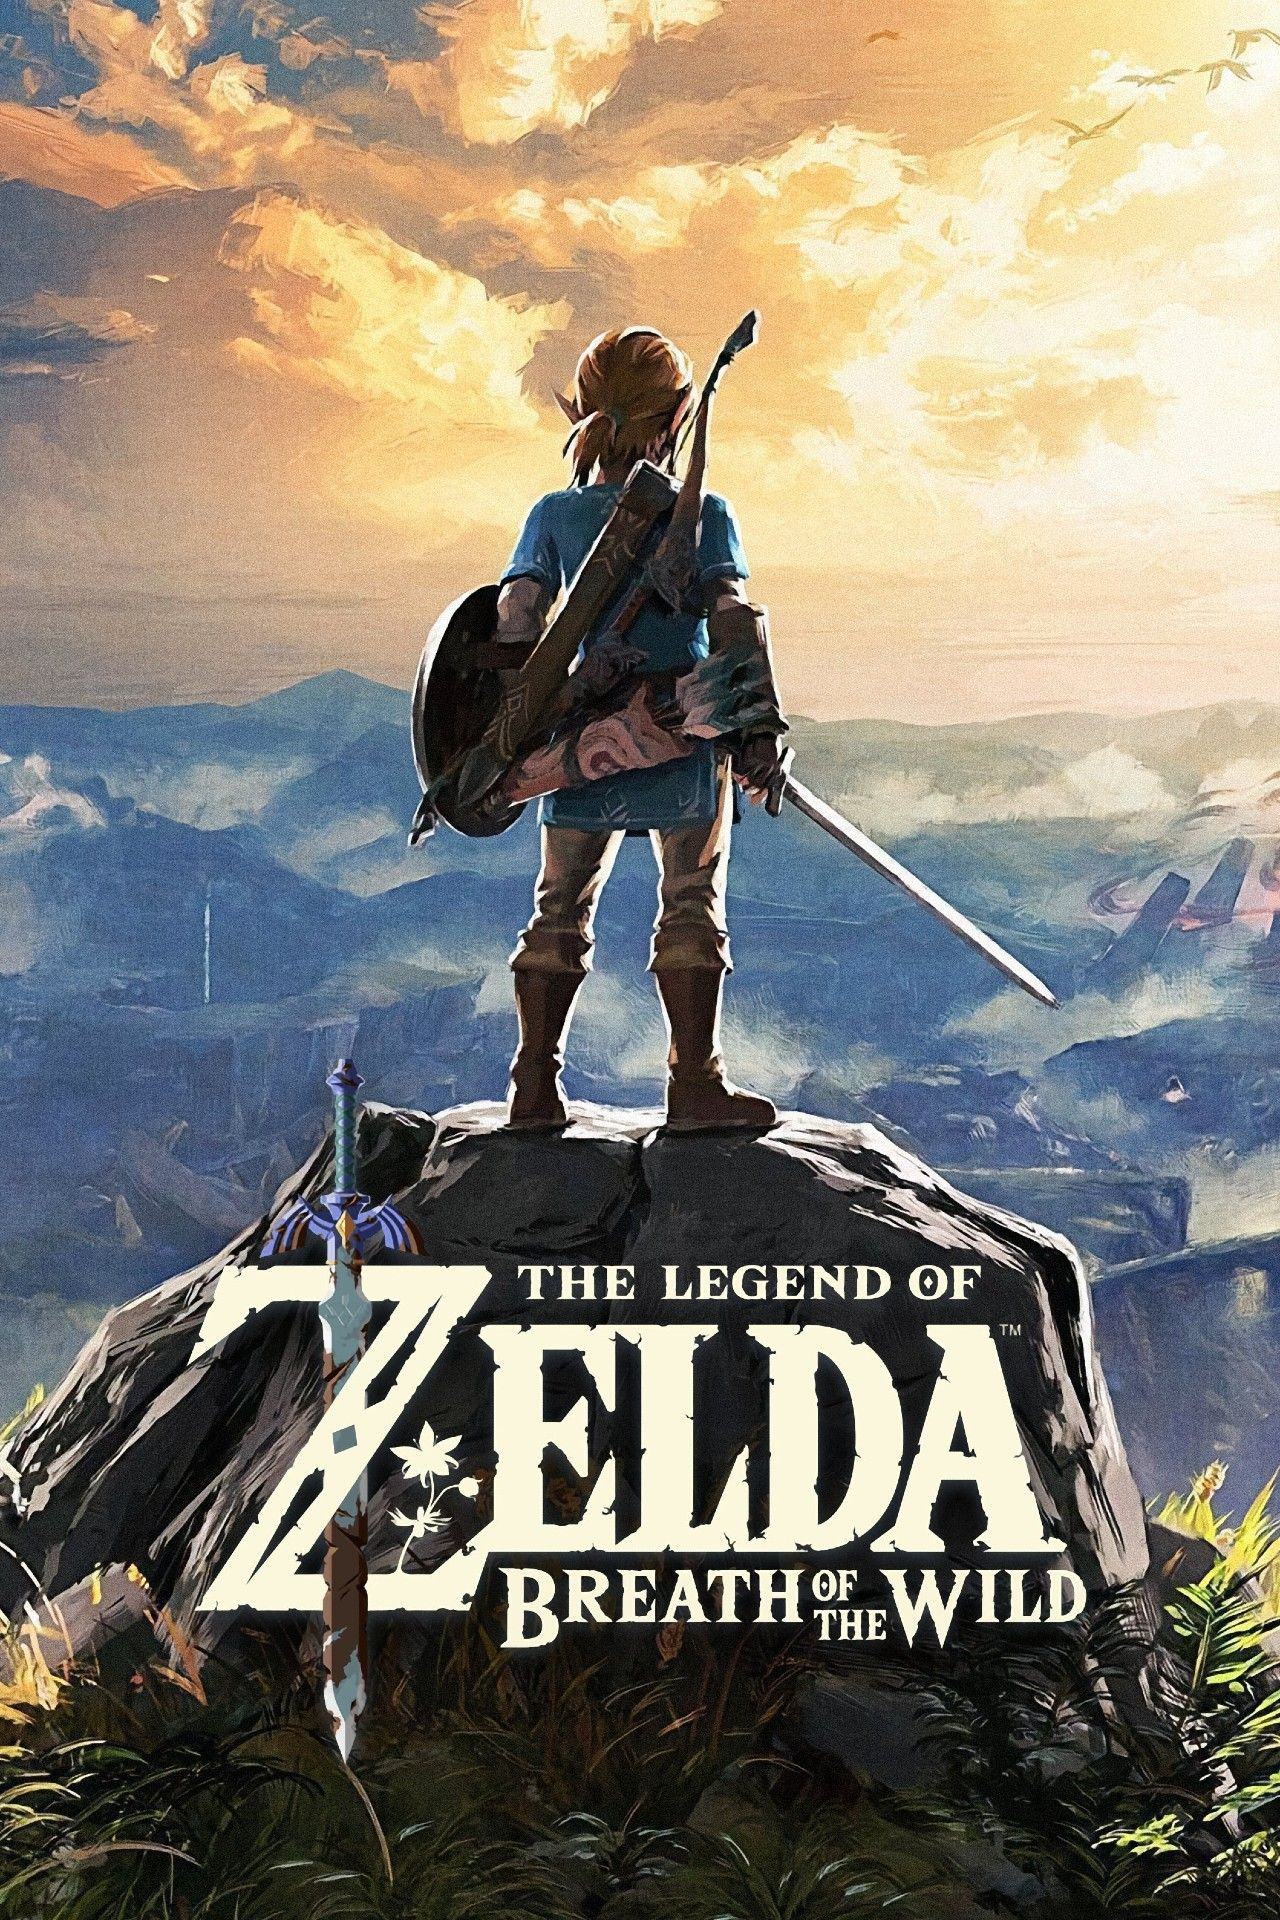 Breath of the Wild 1 poster